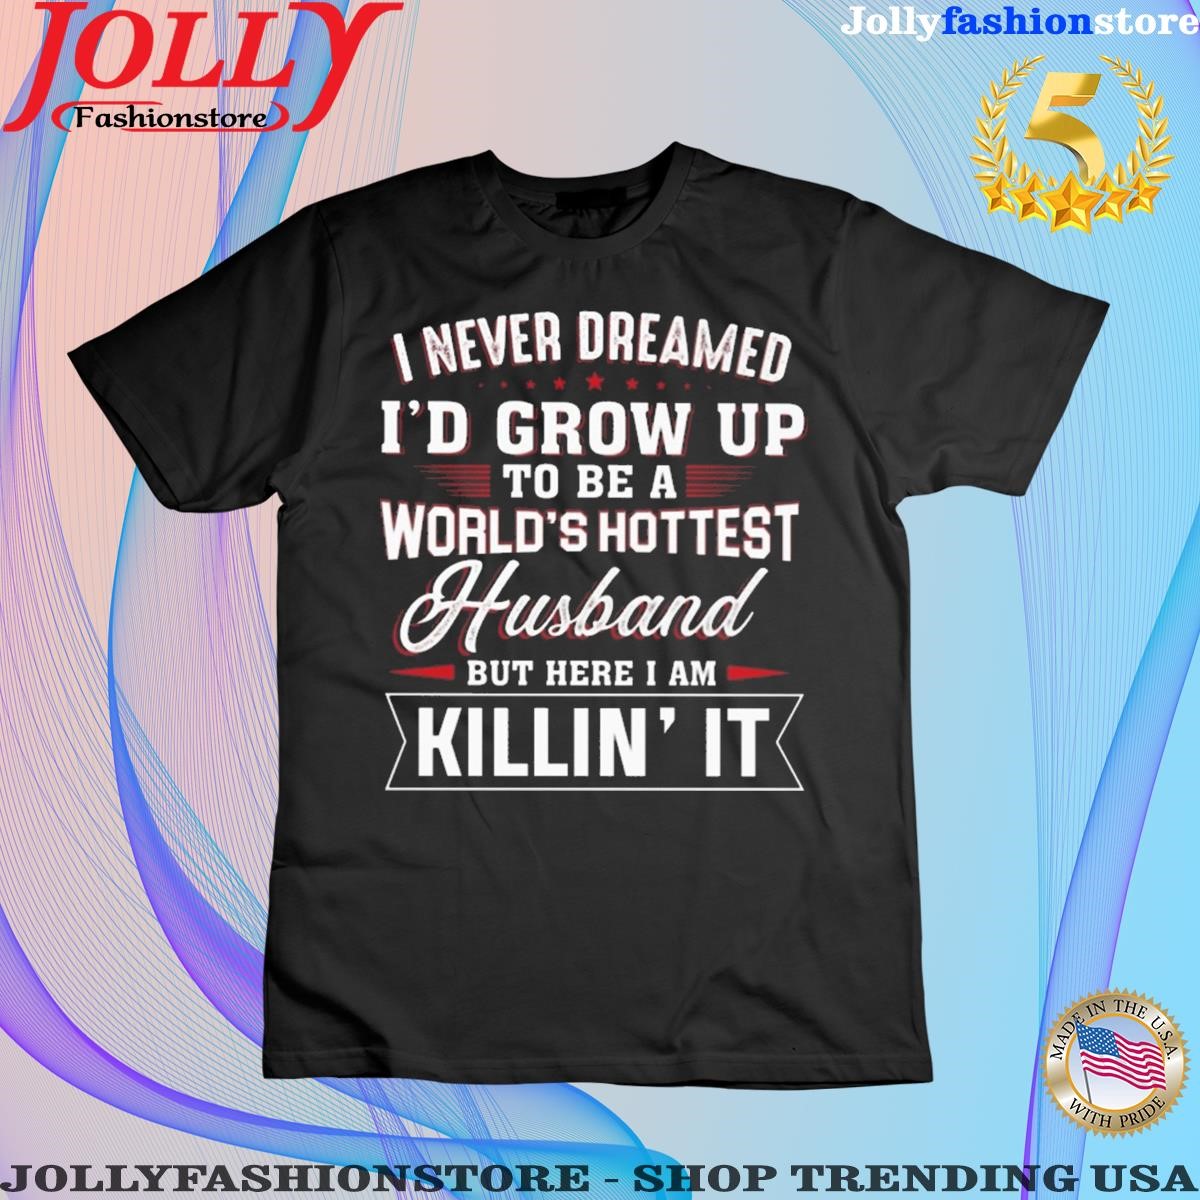 I never dreamed I'd grow up to be a world's hottest husband but here I am killin it shirt women tee shirt.png